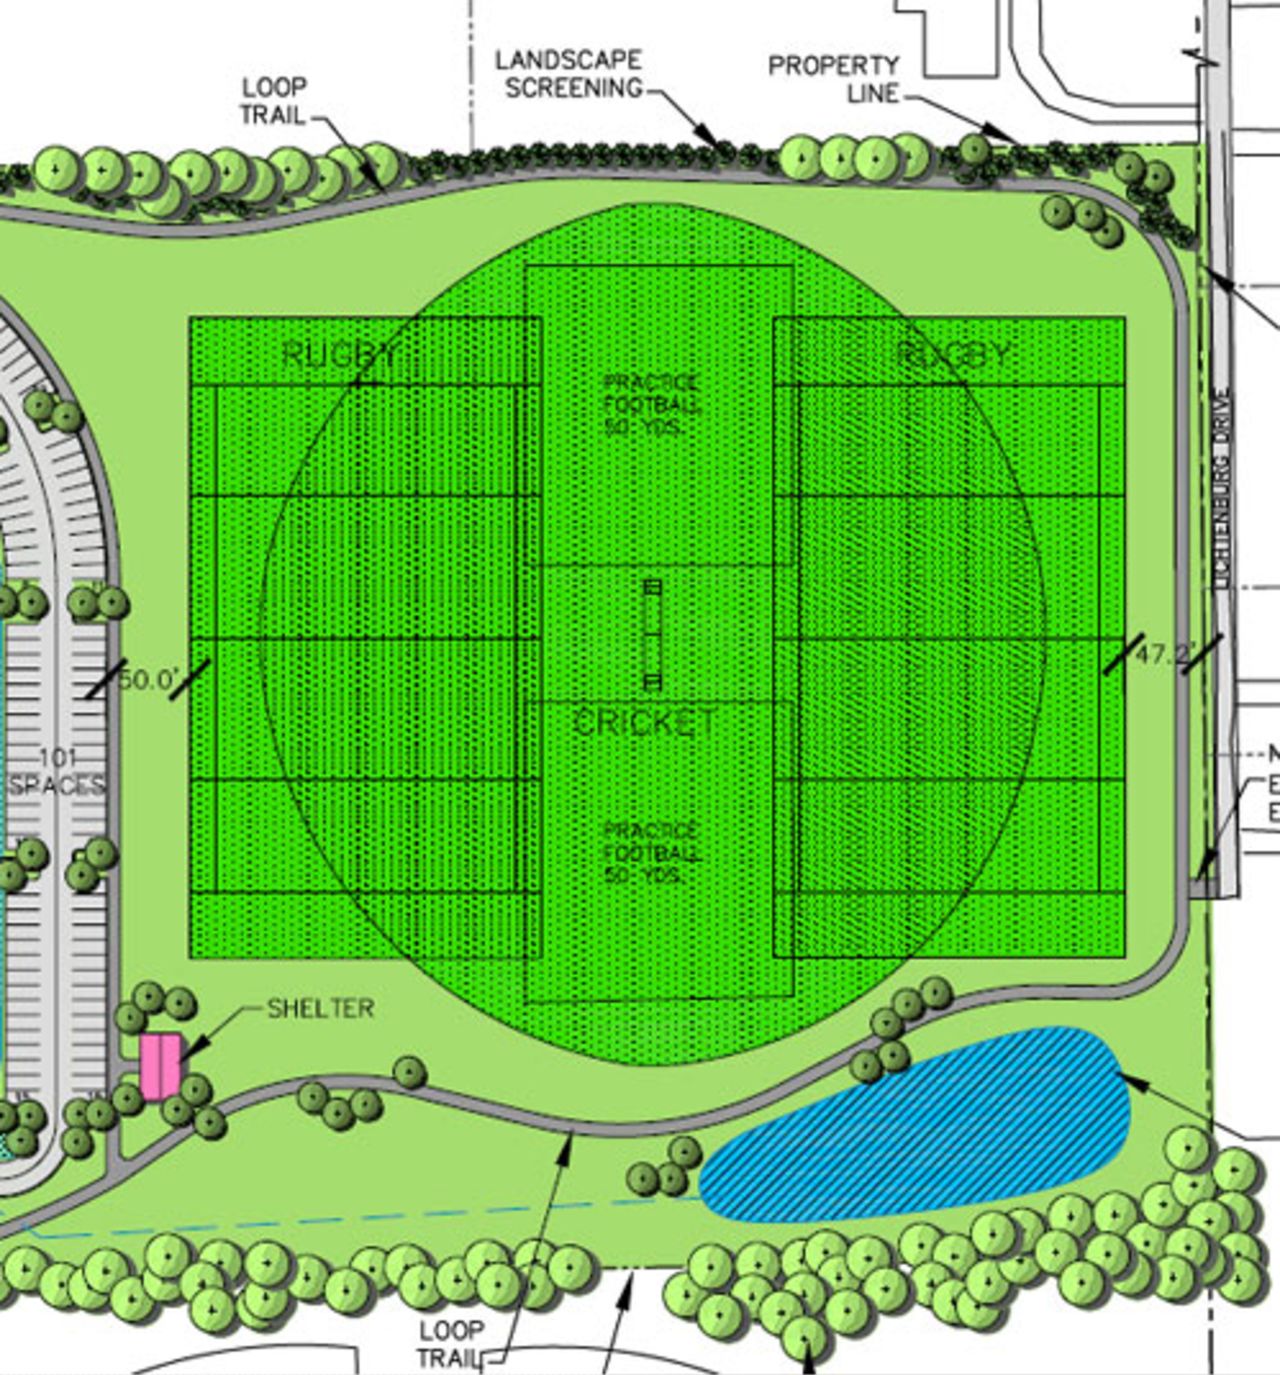 The design sketch for new cricket facilities in Indianapolis, September 15, 2009